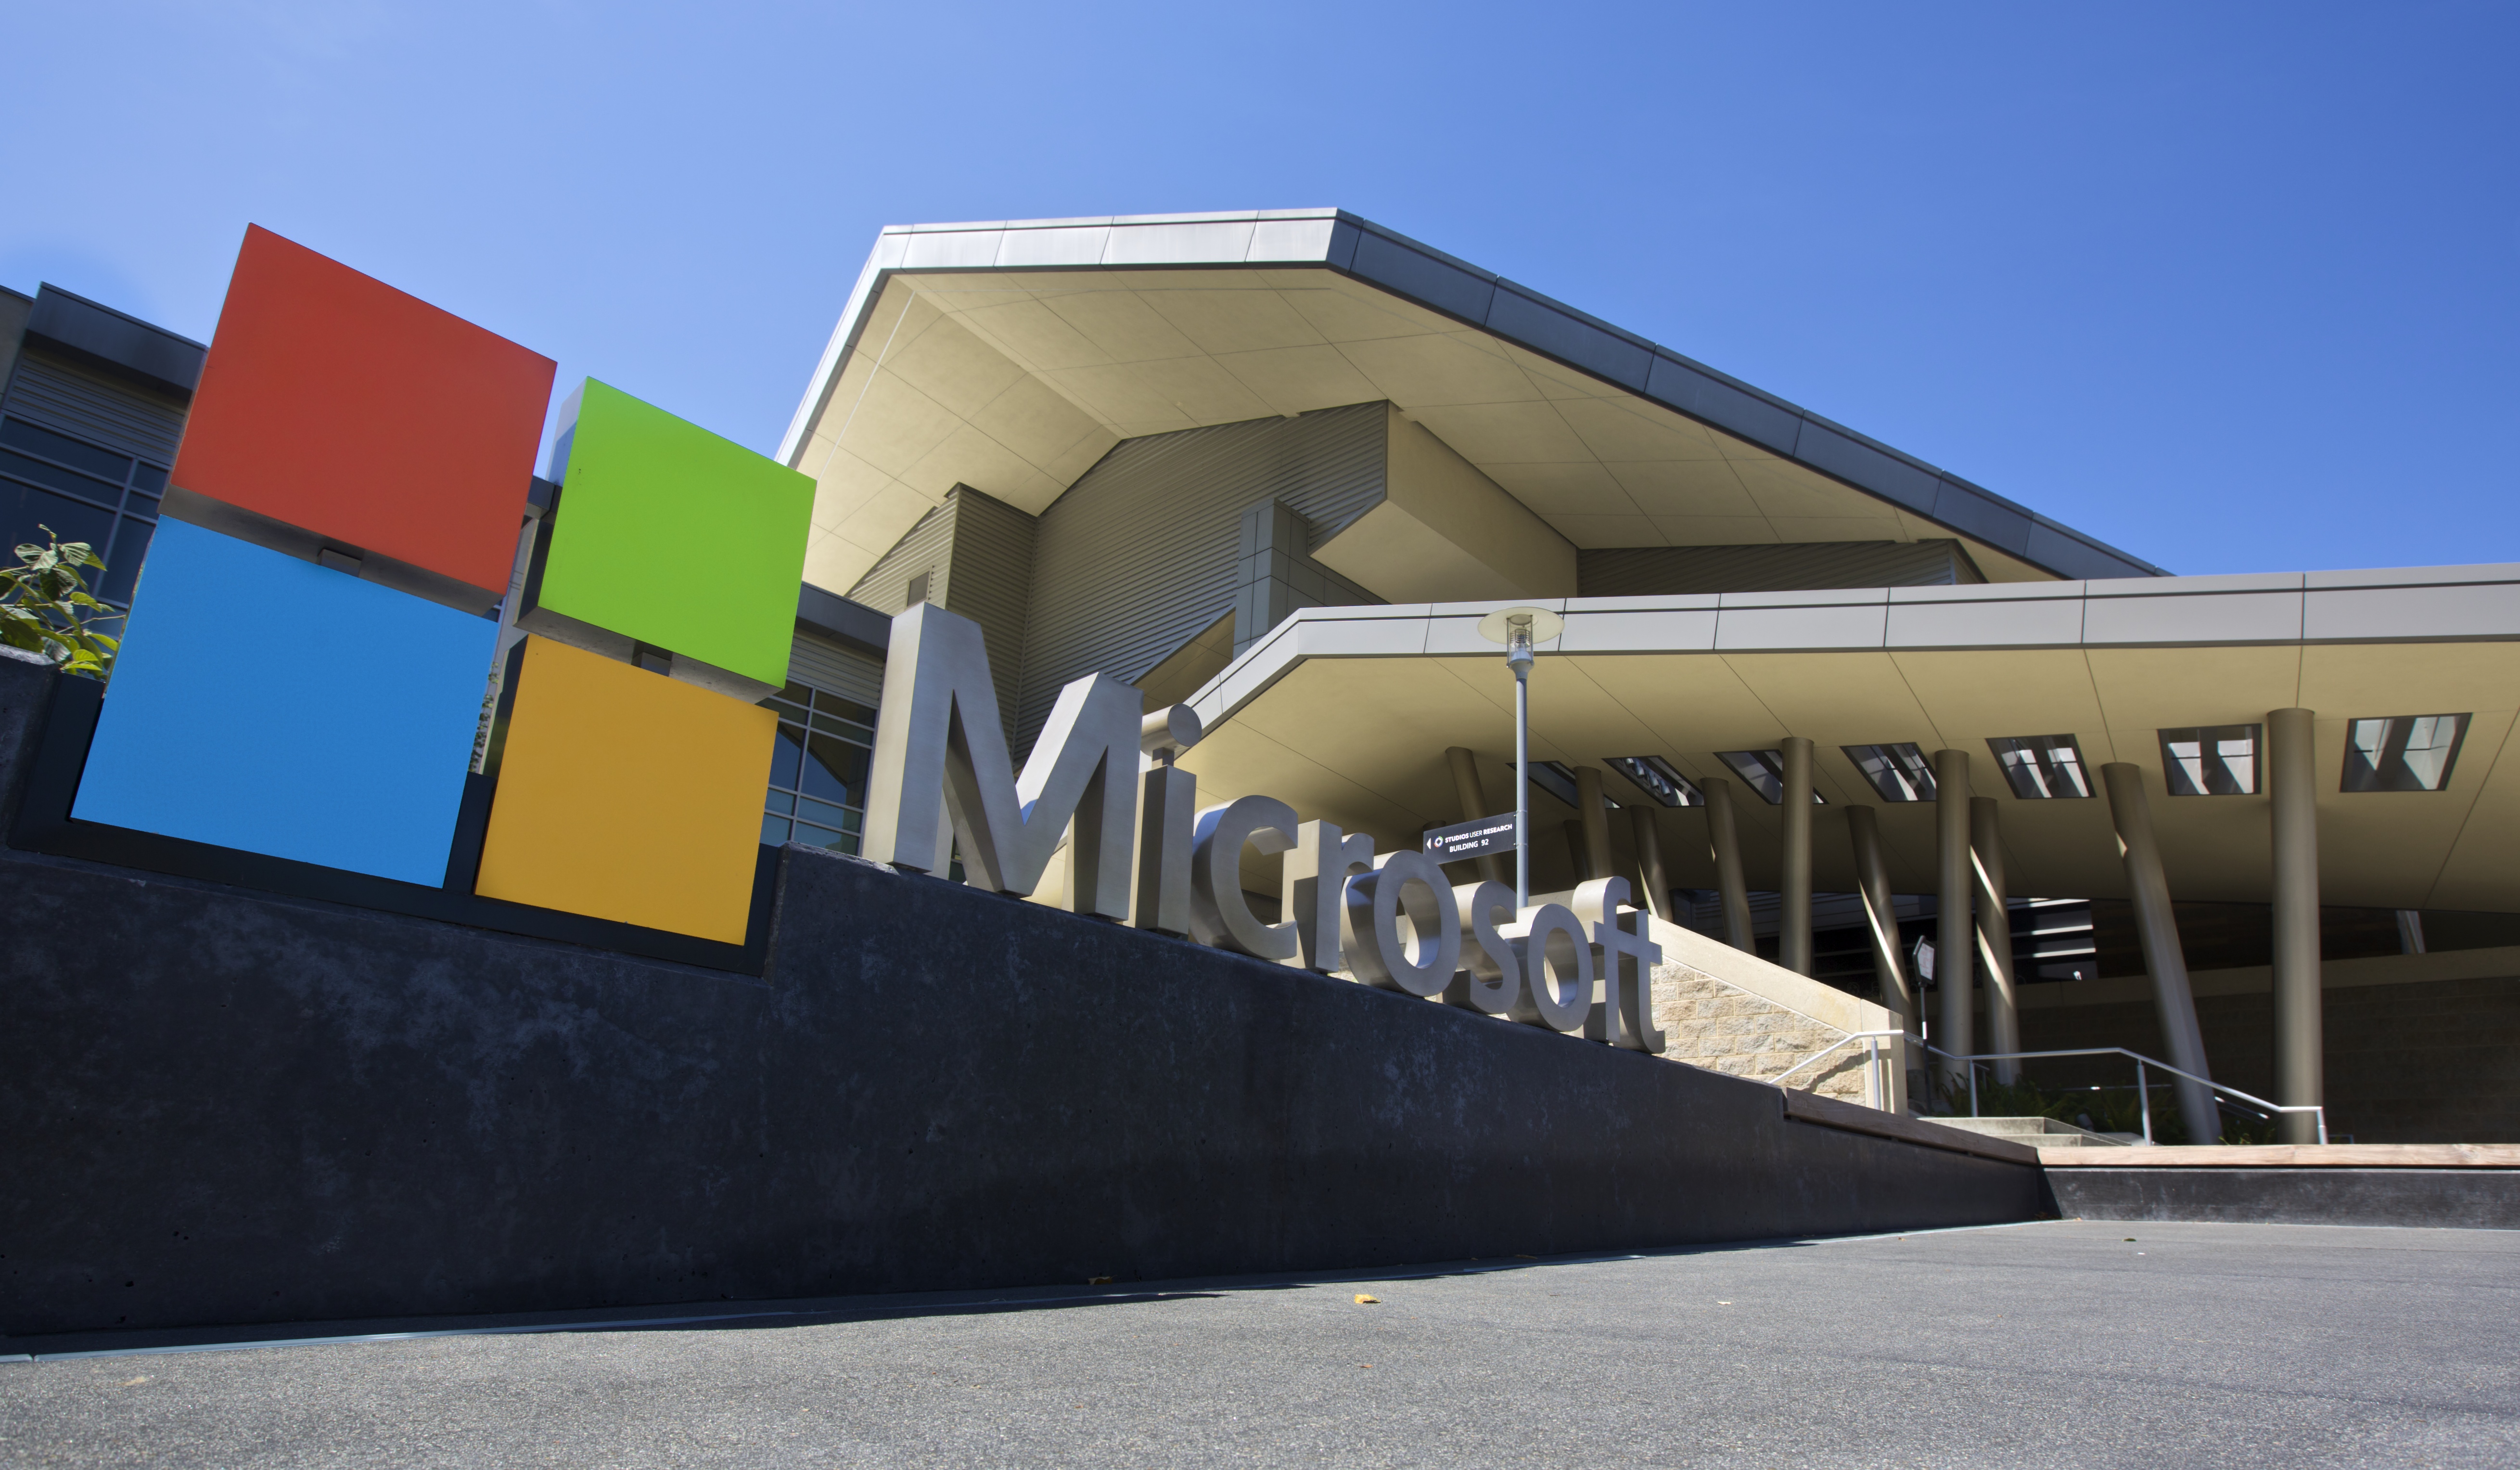 Microsoft to recruit 100 Software Engineers by end of year, 500 by 2023 to staff Africa Development Centre